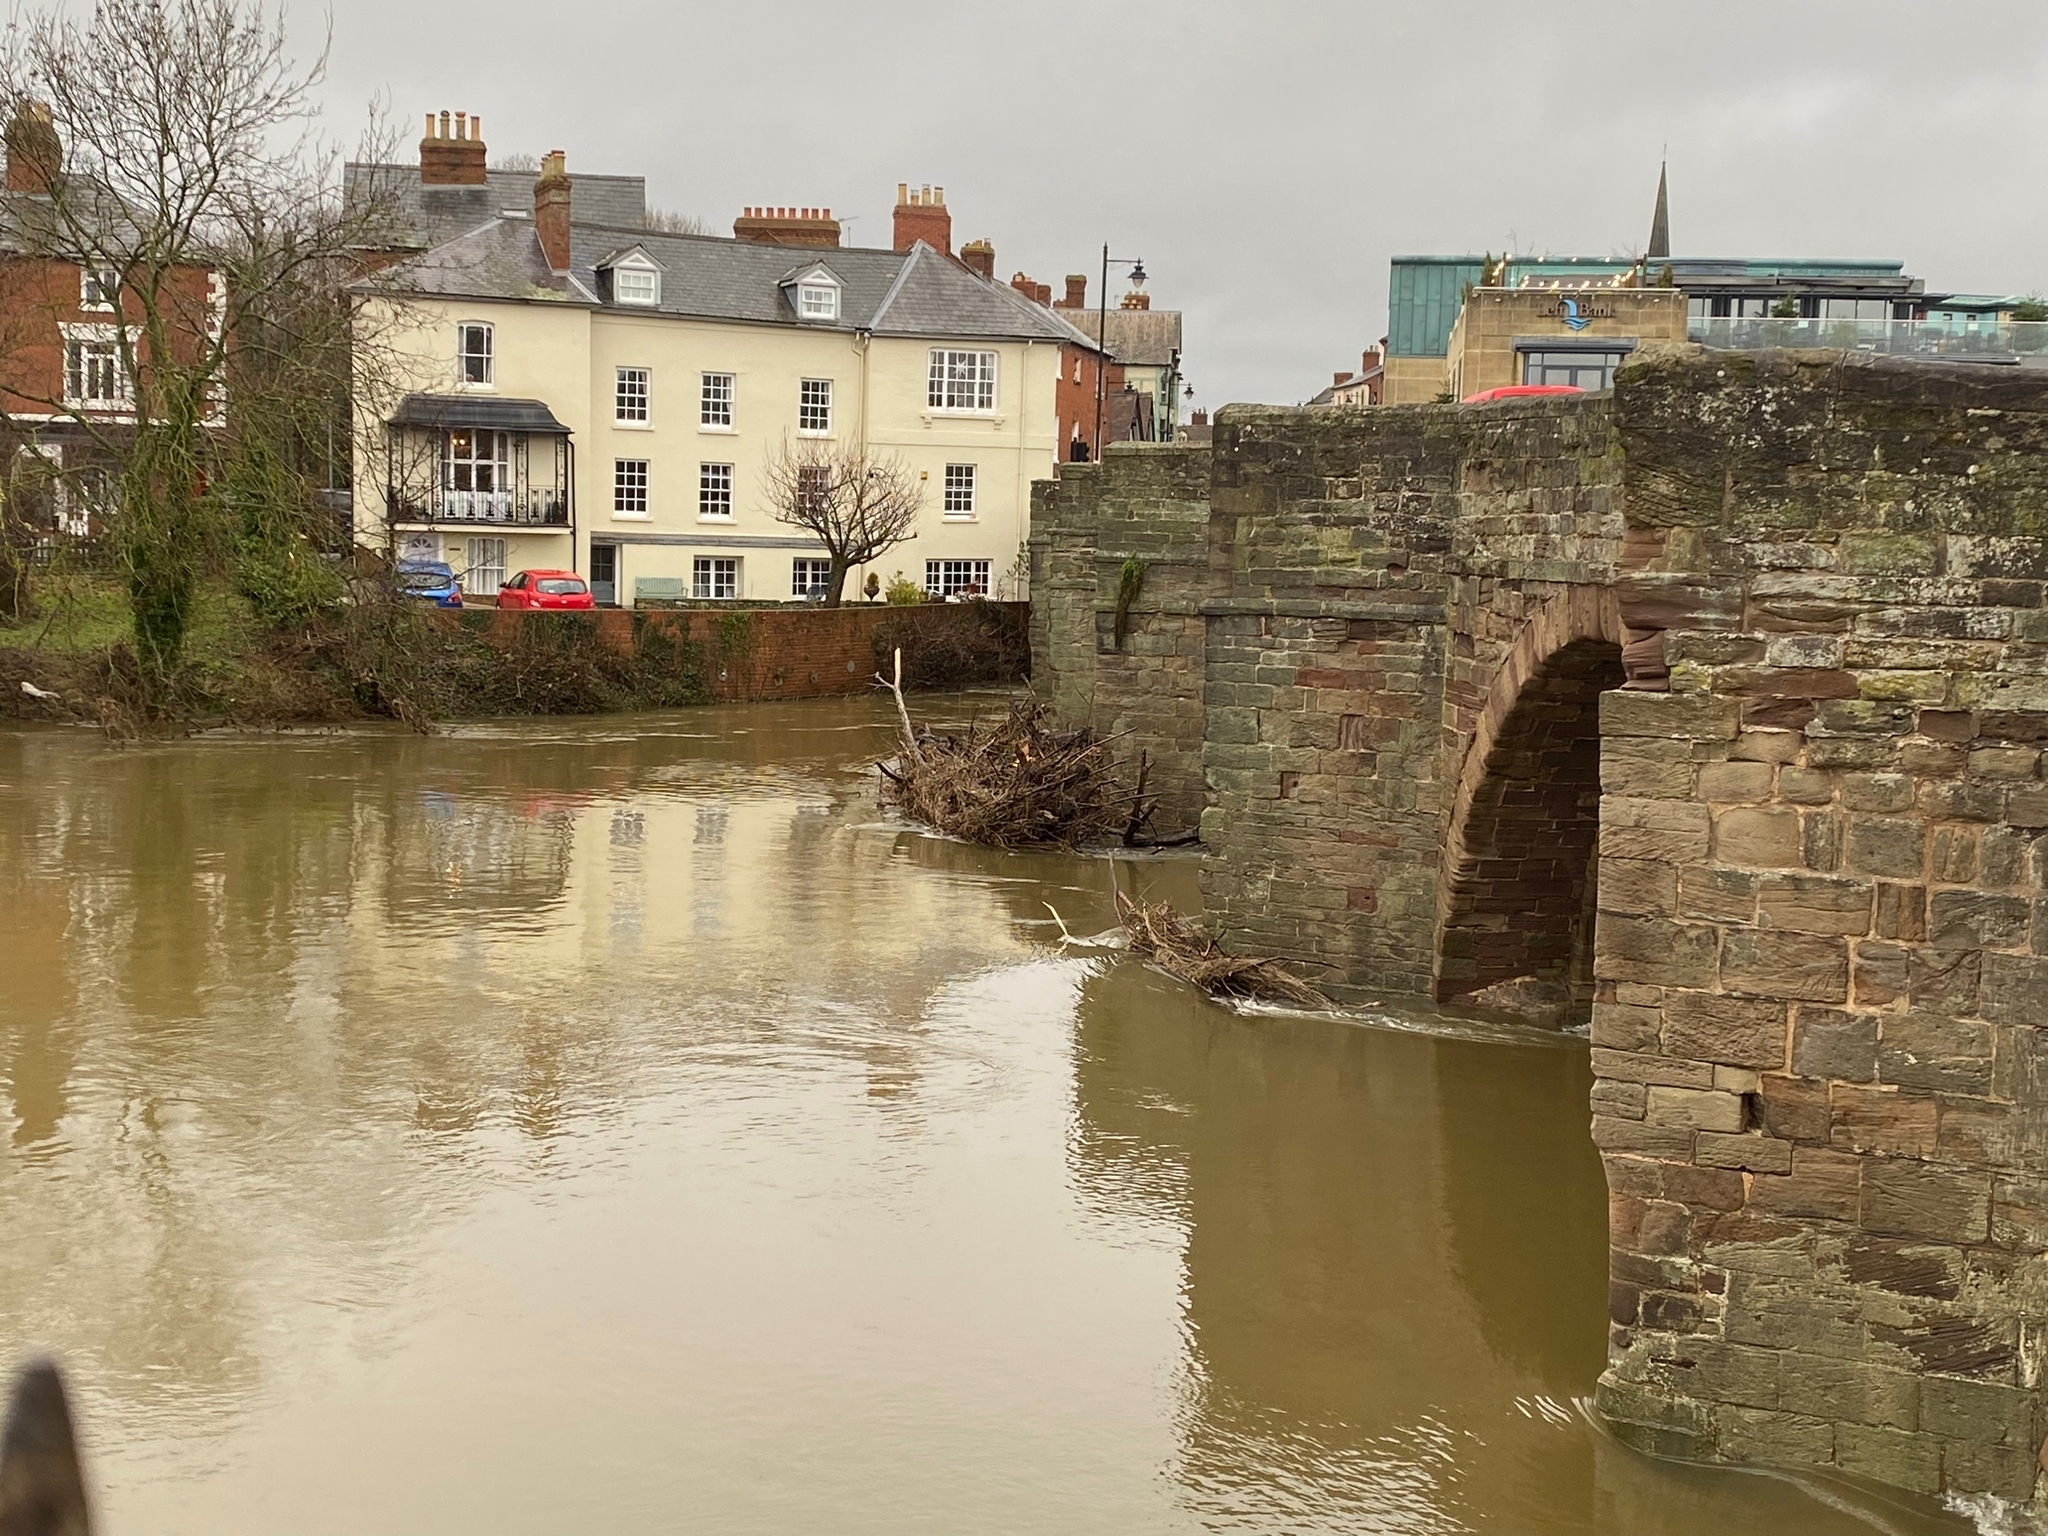 Flooding in Hereford has led to debris under the Old Bridge